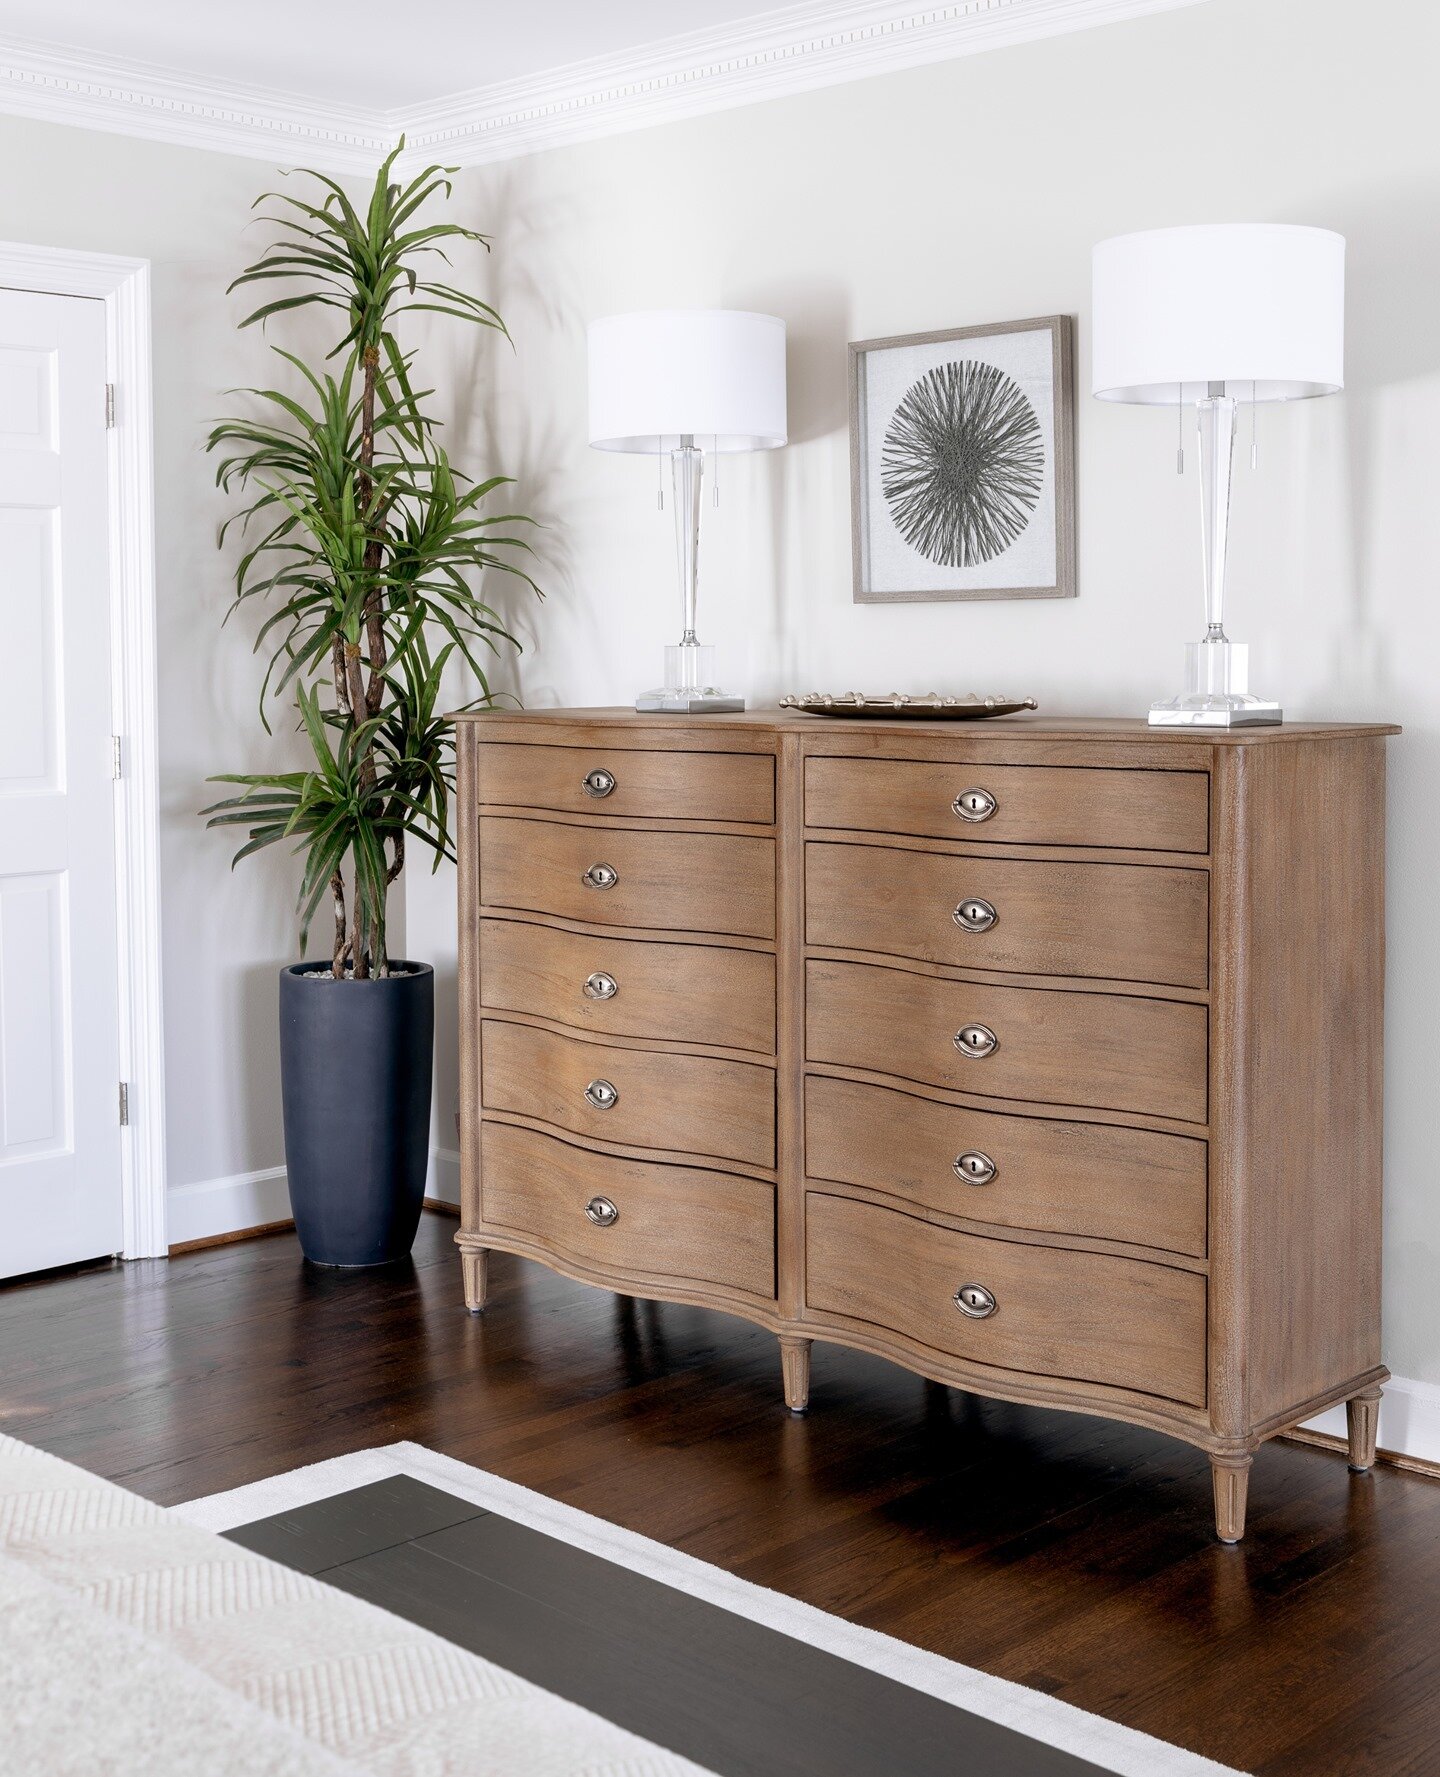 Stylish storage pieces are a must in any room. This tall, vintage inspired dresser adds both character and functionality to this clean transitional bedroom space - and when your clients are tall, the furniture choices have to work accordingly! Dressi